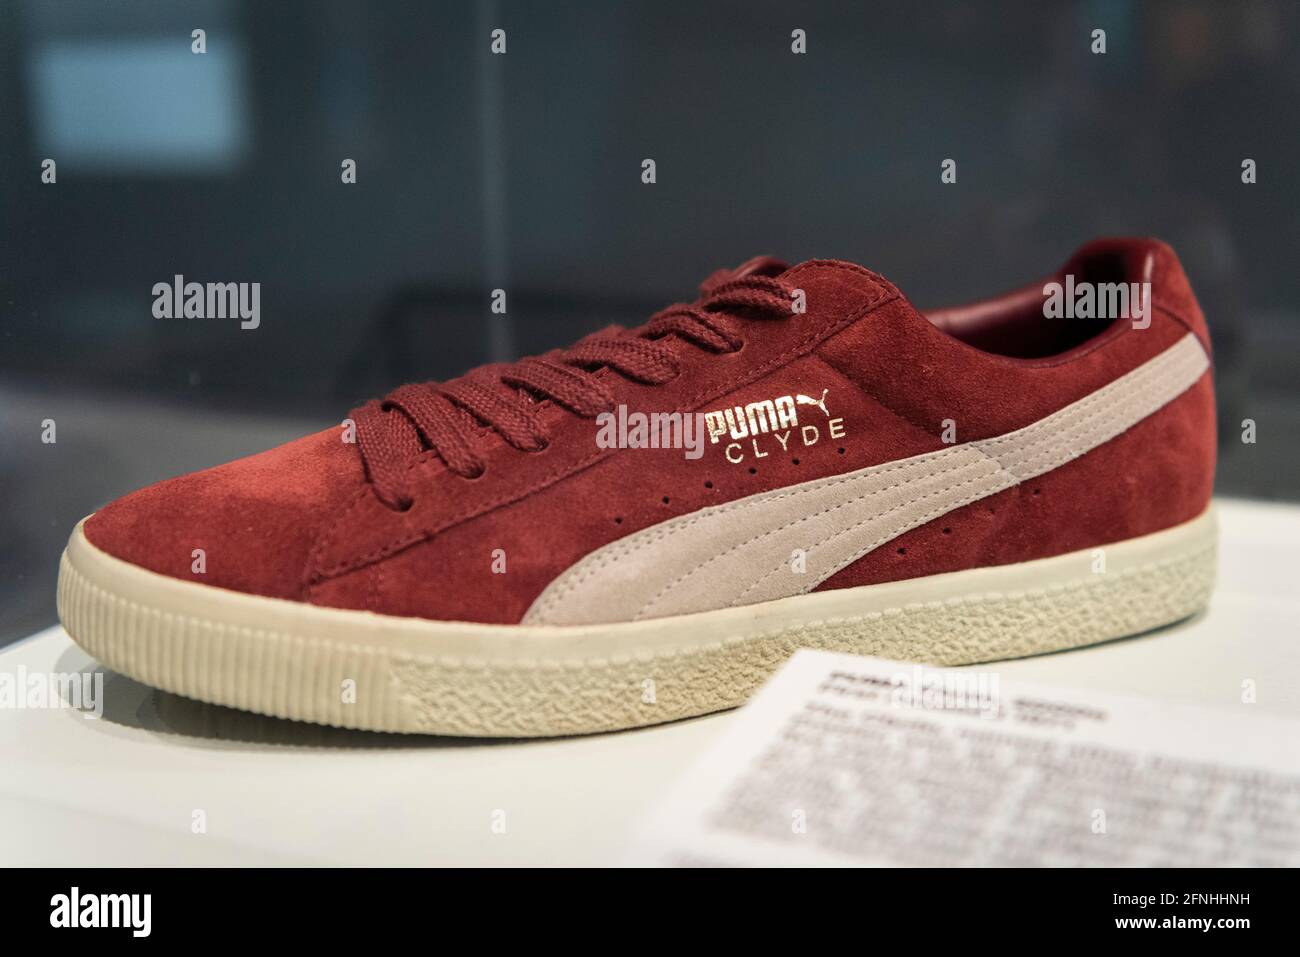 Puma Trainers High Resolution Stock Photography and Images - Alamy